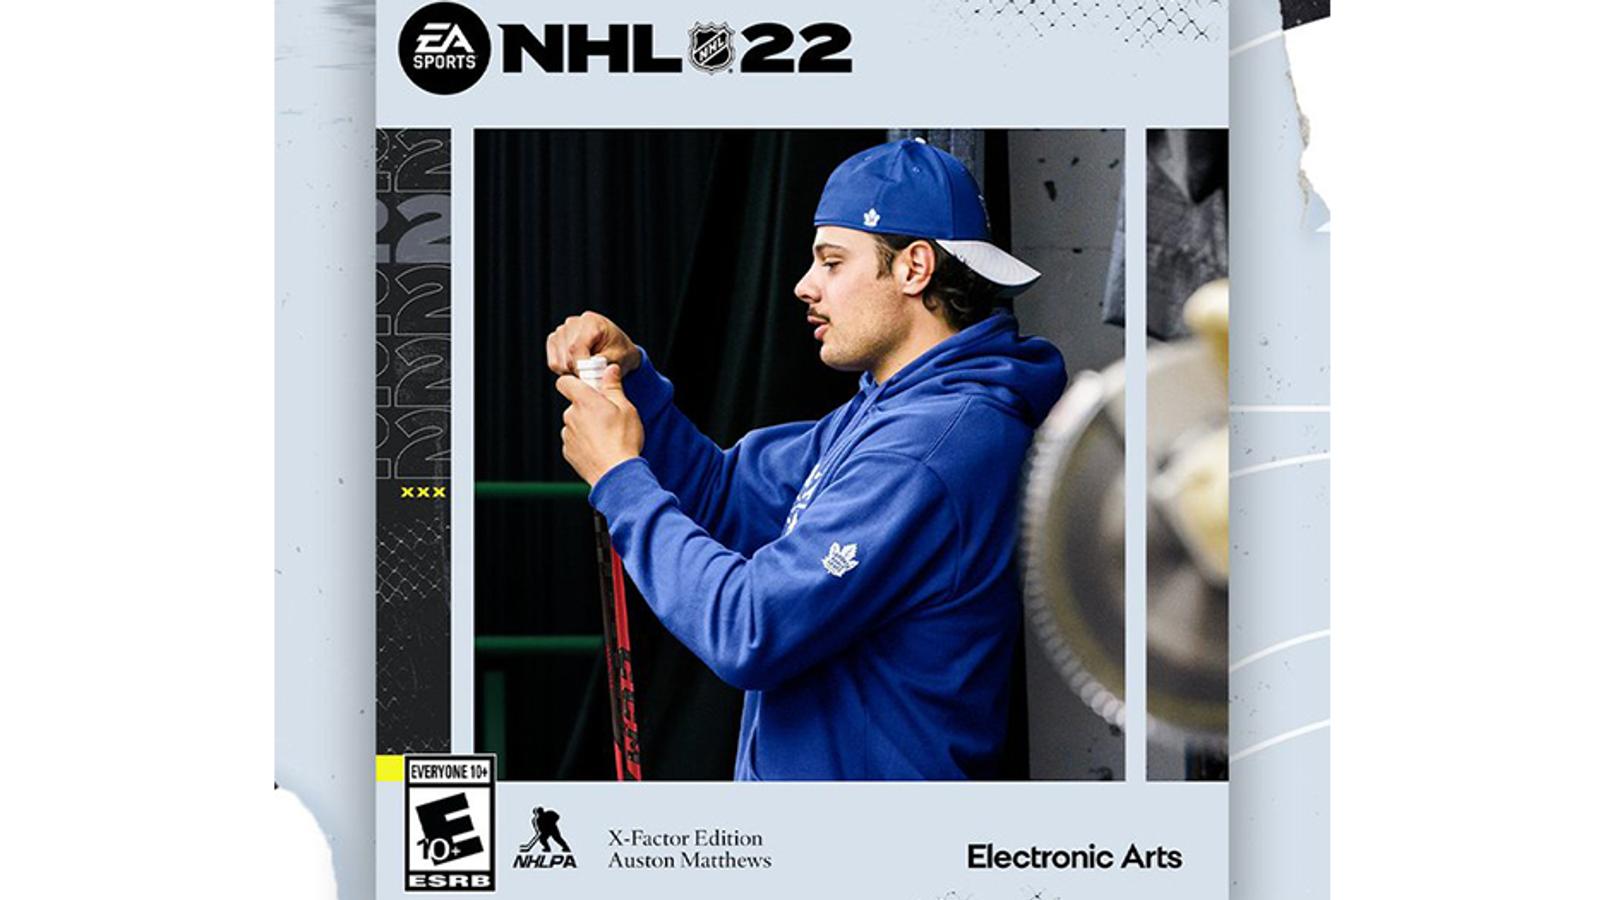 Auston Matthews named EA Sports NHL cover athlete for the second time in three years